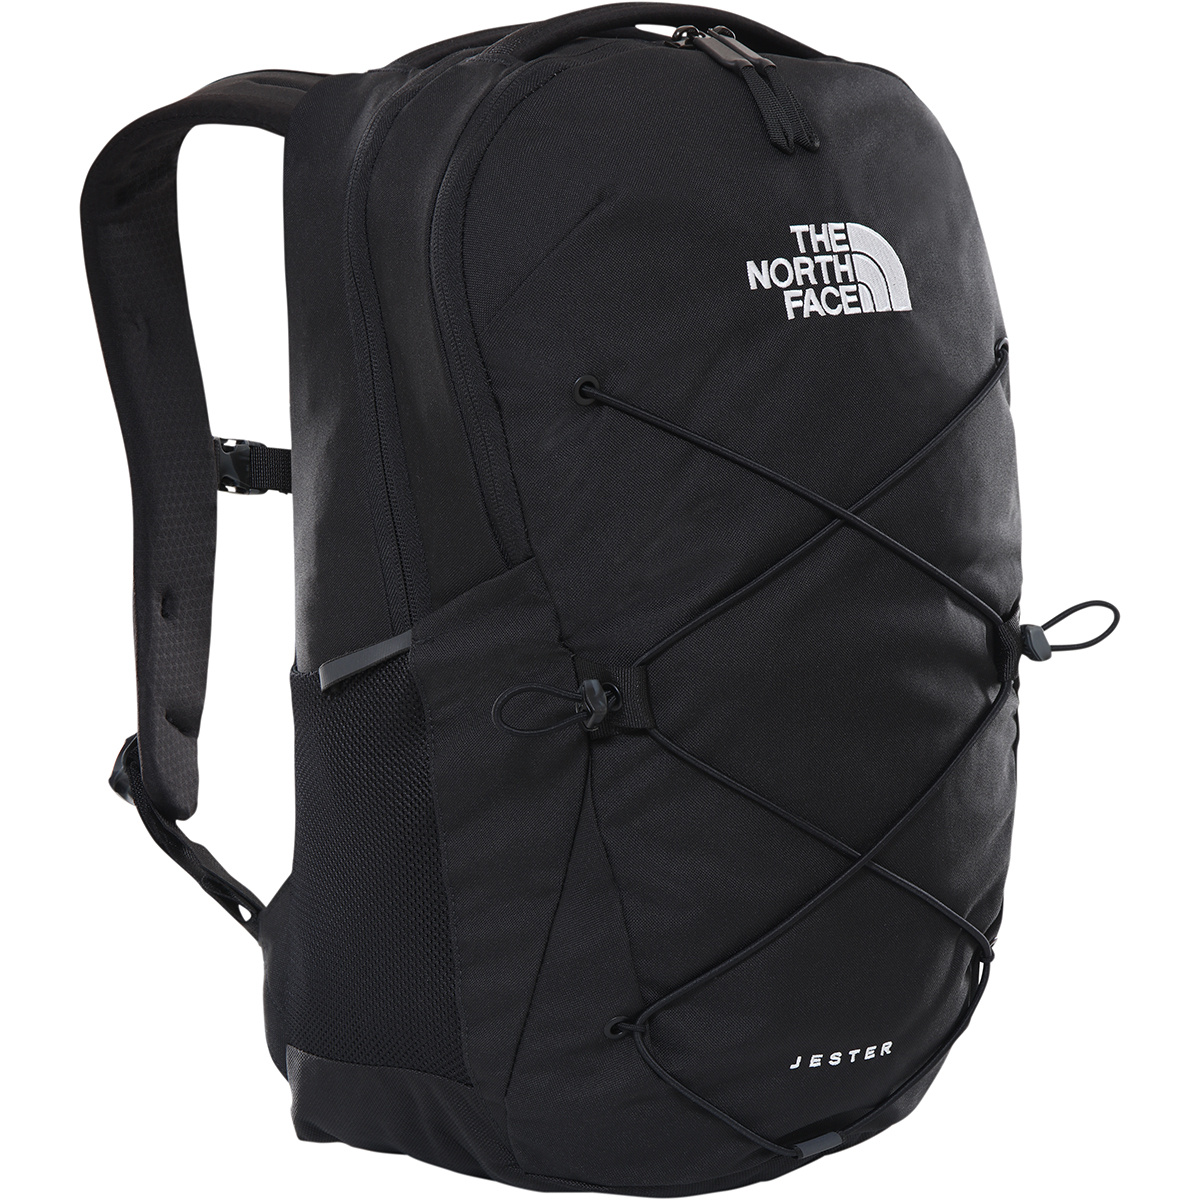 Image of The North Face Zaino Juster